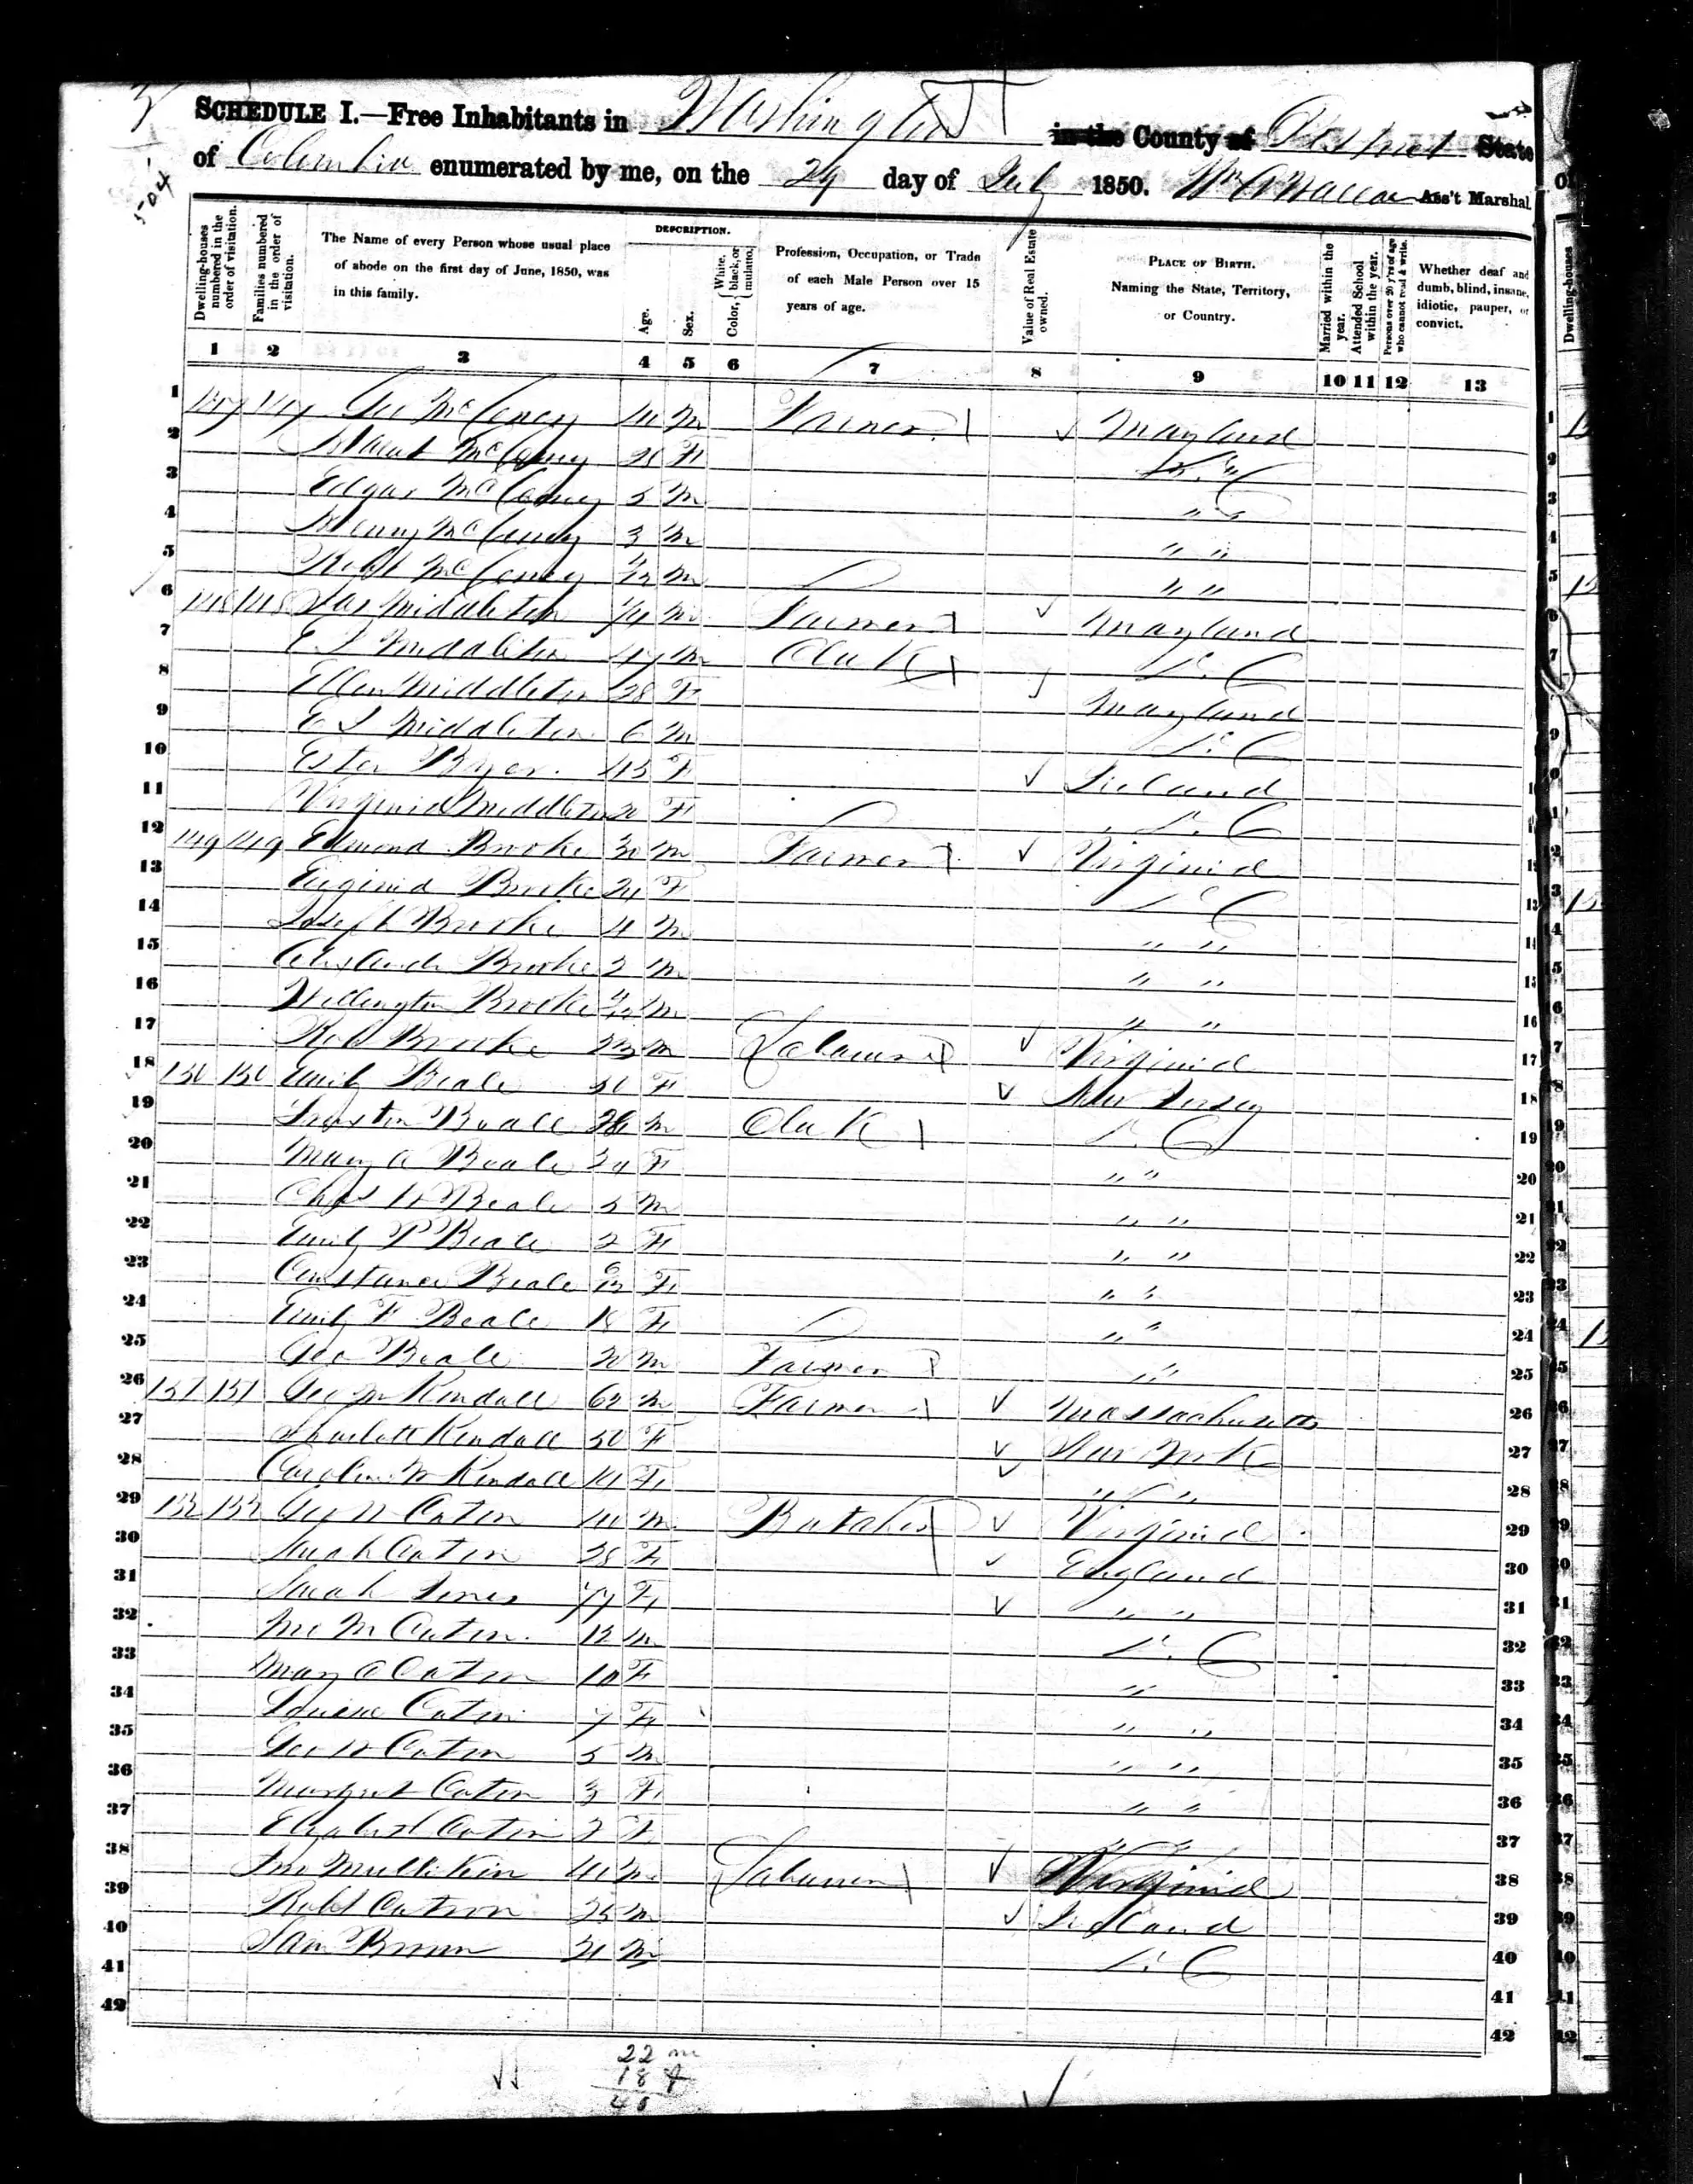 Beale family in the 1850 U.S. Census